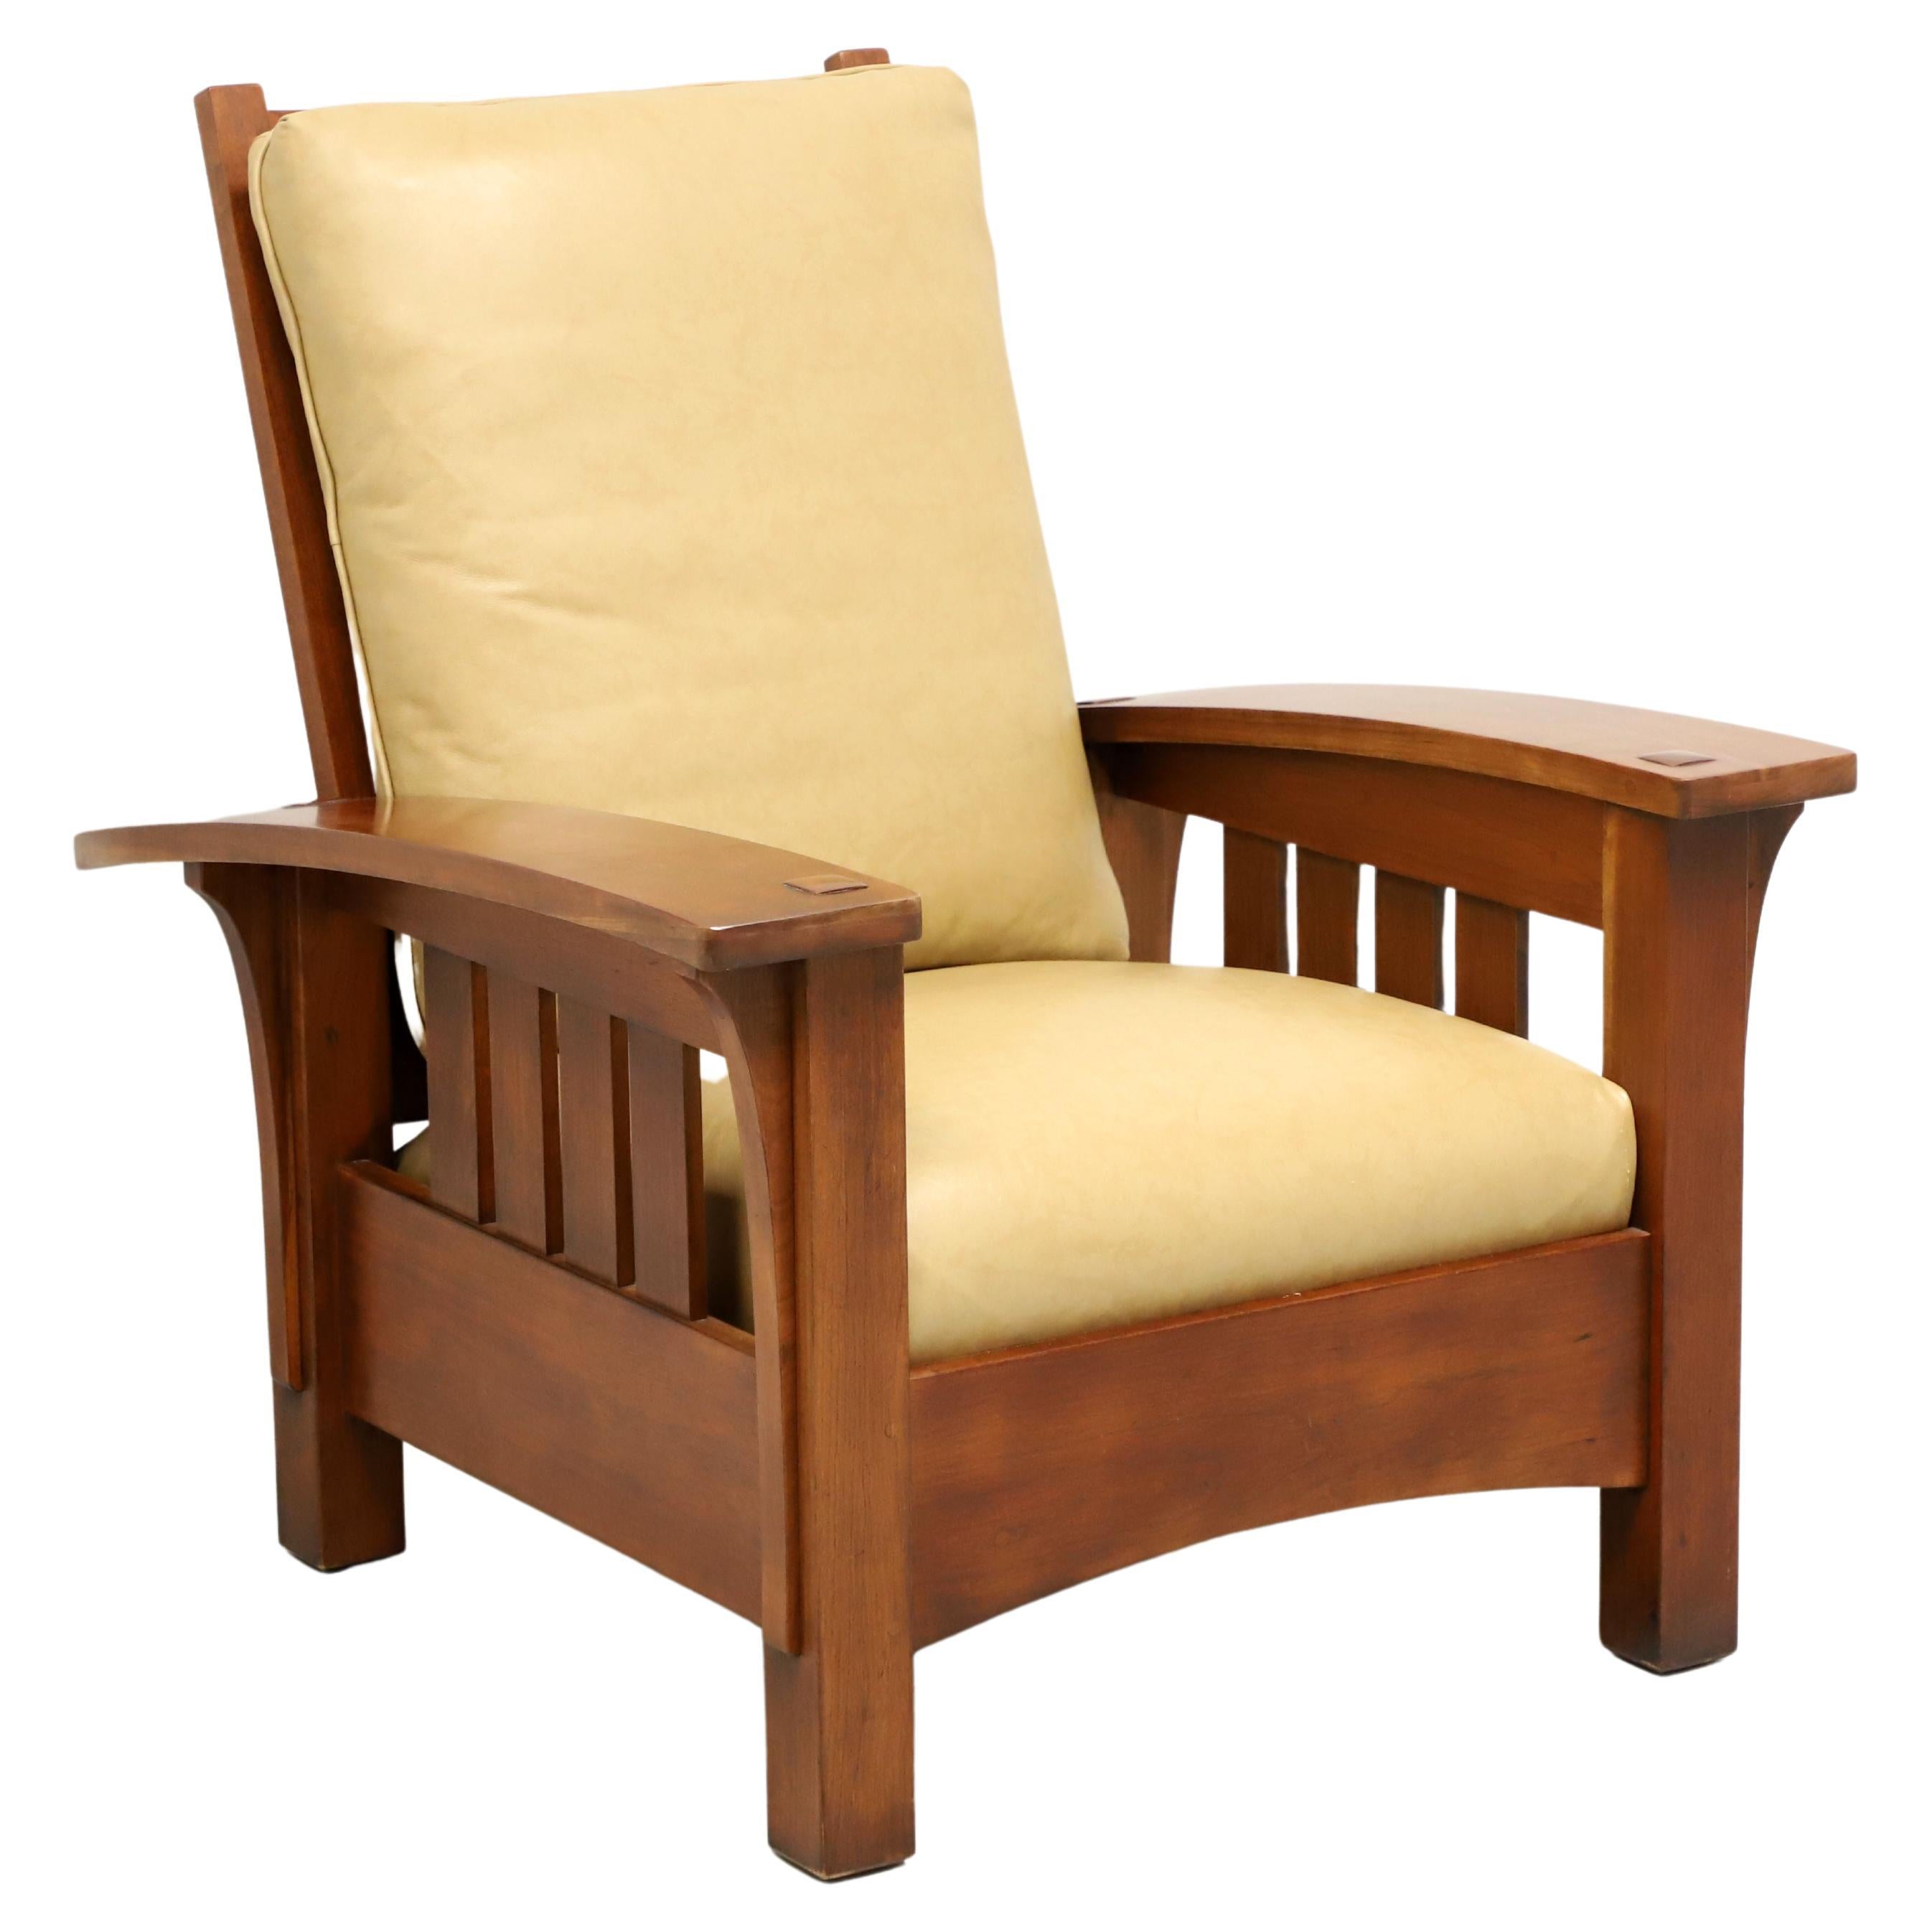 STICKLEY Cherry & Leather Bow Arm Reclining Morris Chair 91-406 - A